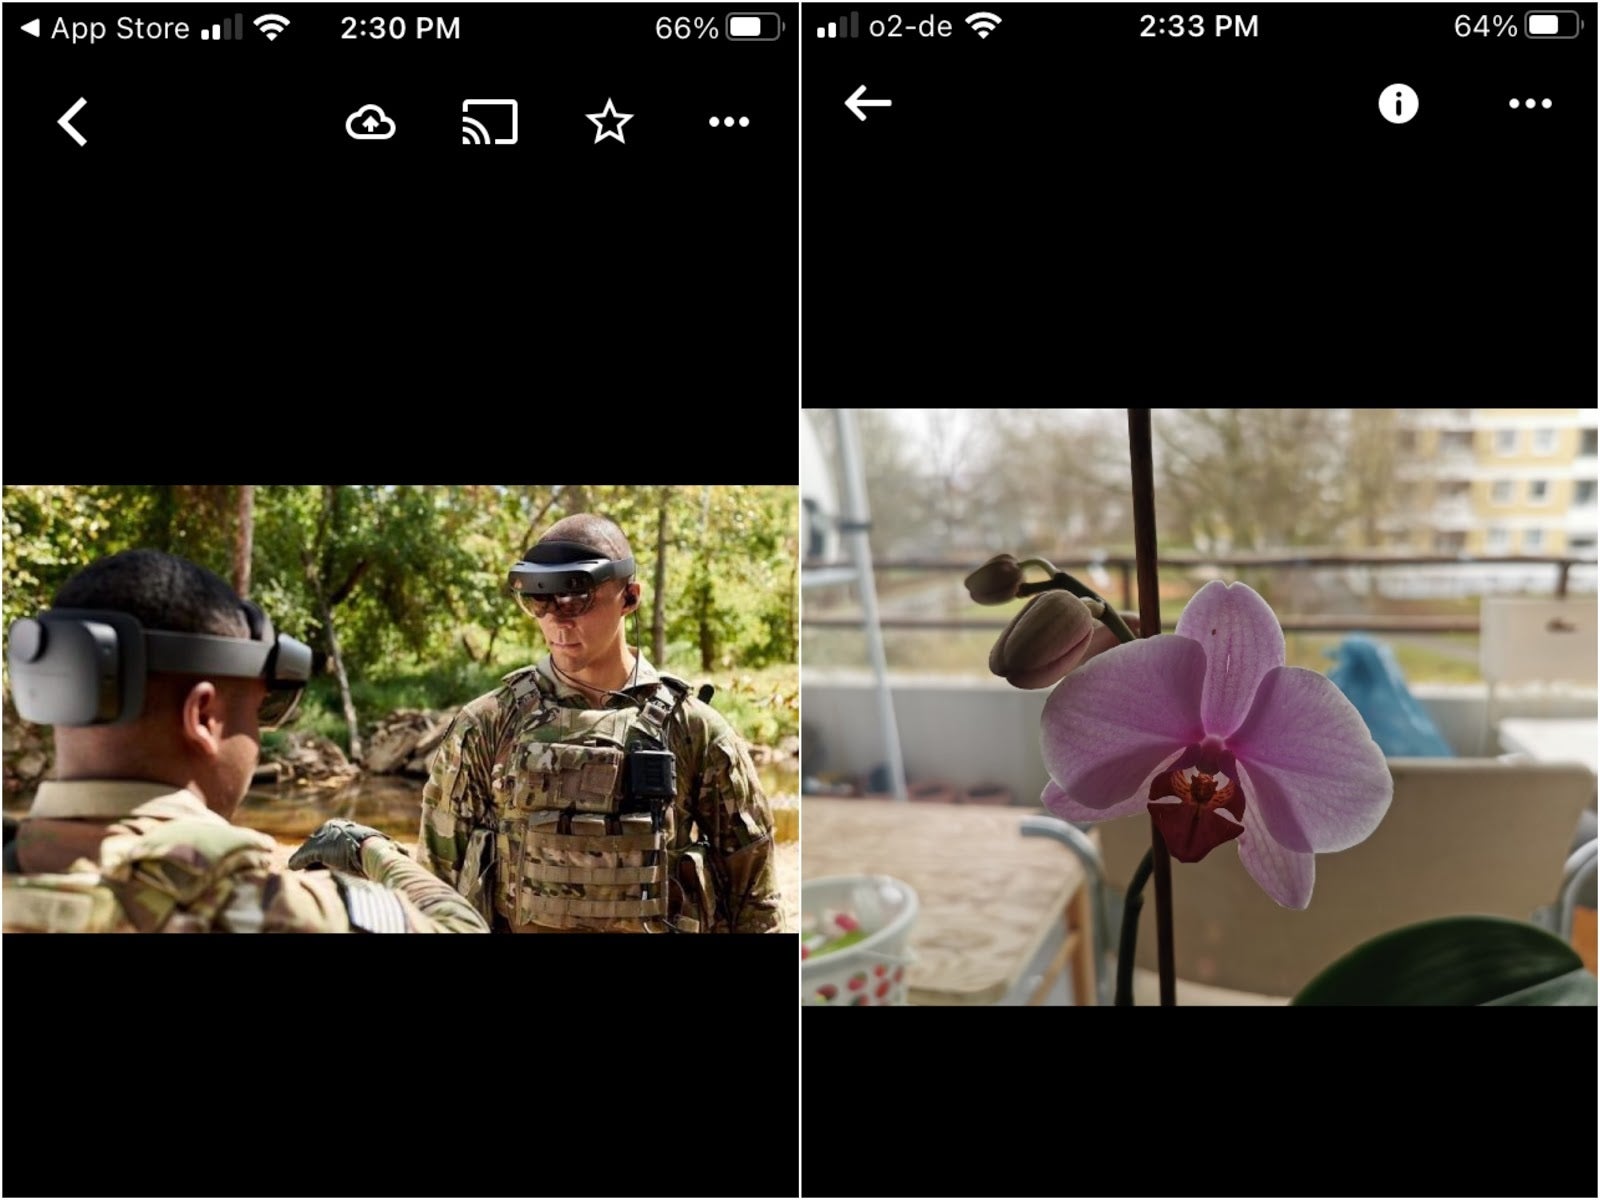 Google Photos on the right; Amazon Photos on the left - How to check image size, resolution, and more on your iPhone or iPad